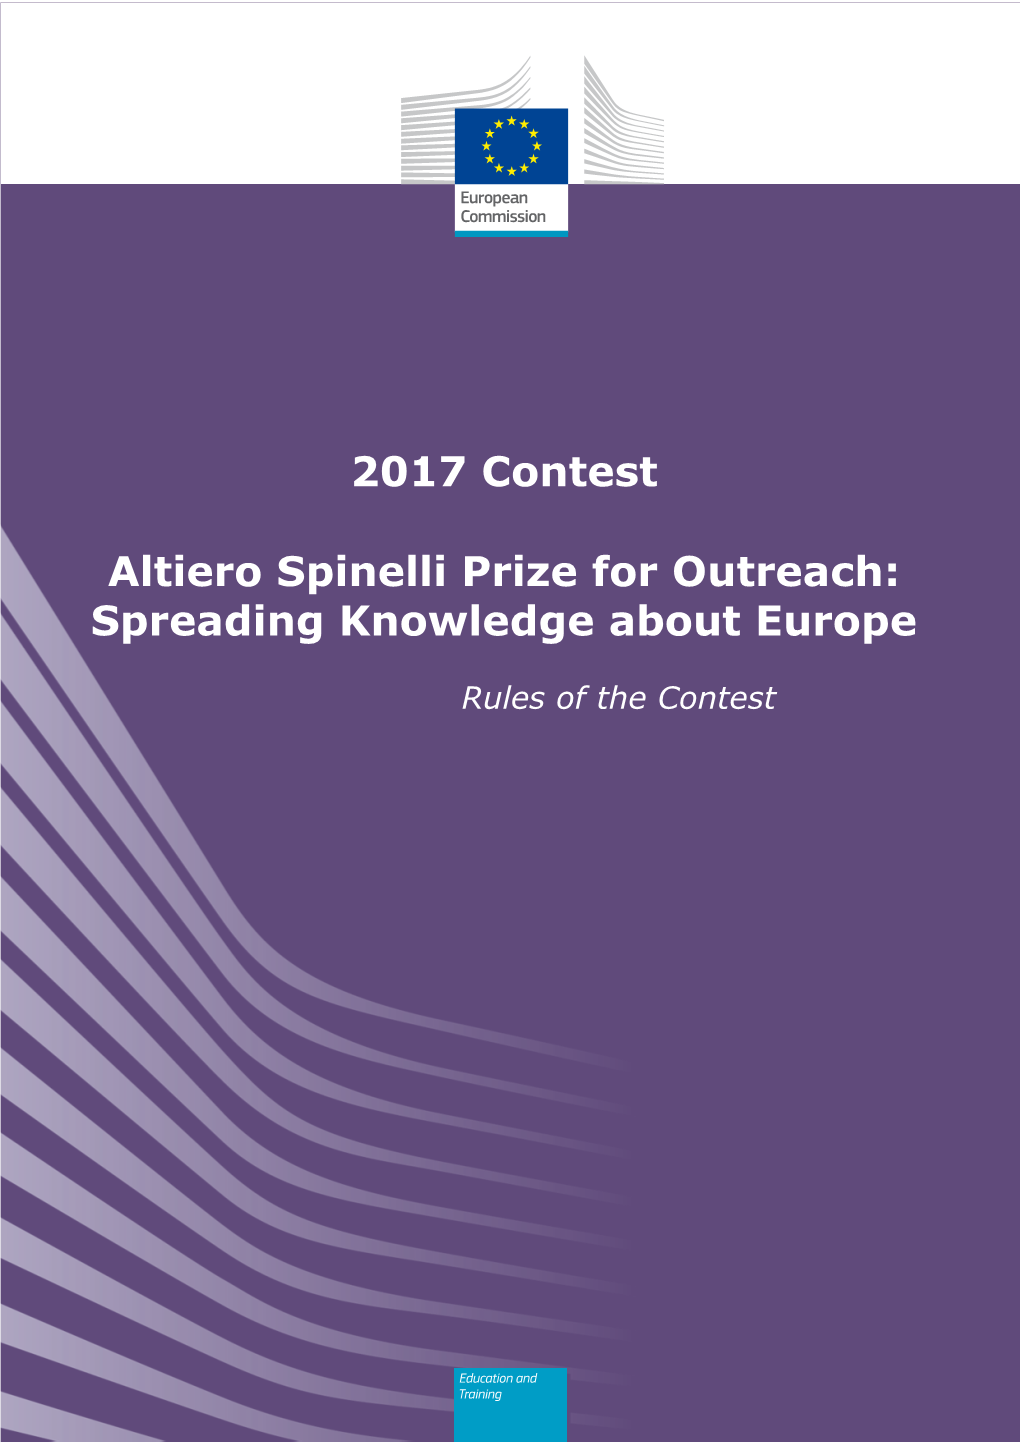 Contest Rules of the Altiero Spinelli Prize for Outreach